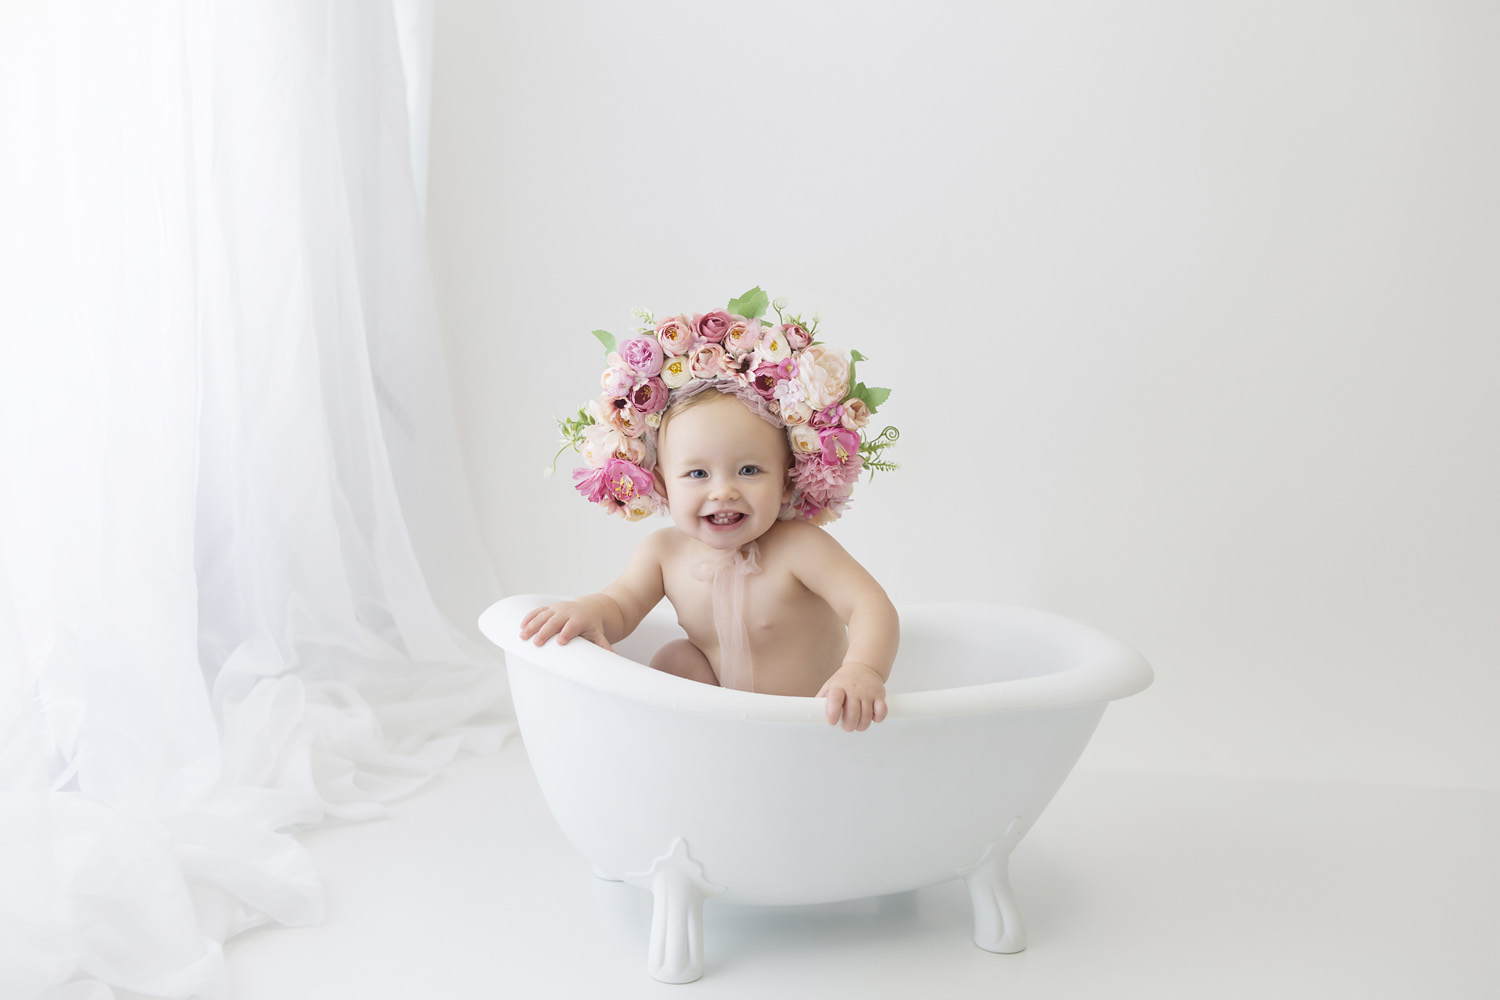 baby sitting in a tub for her one year milestone cake smash photography session in plantation, fl